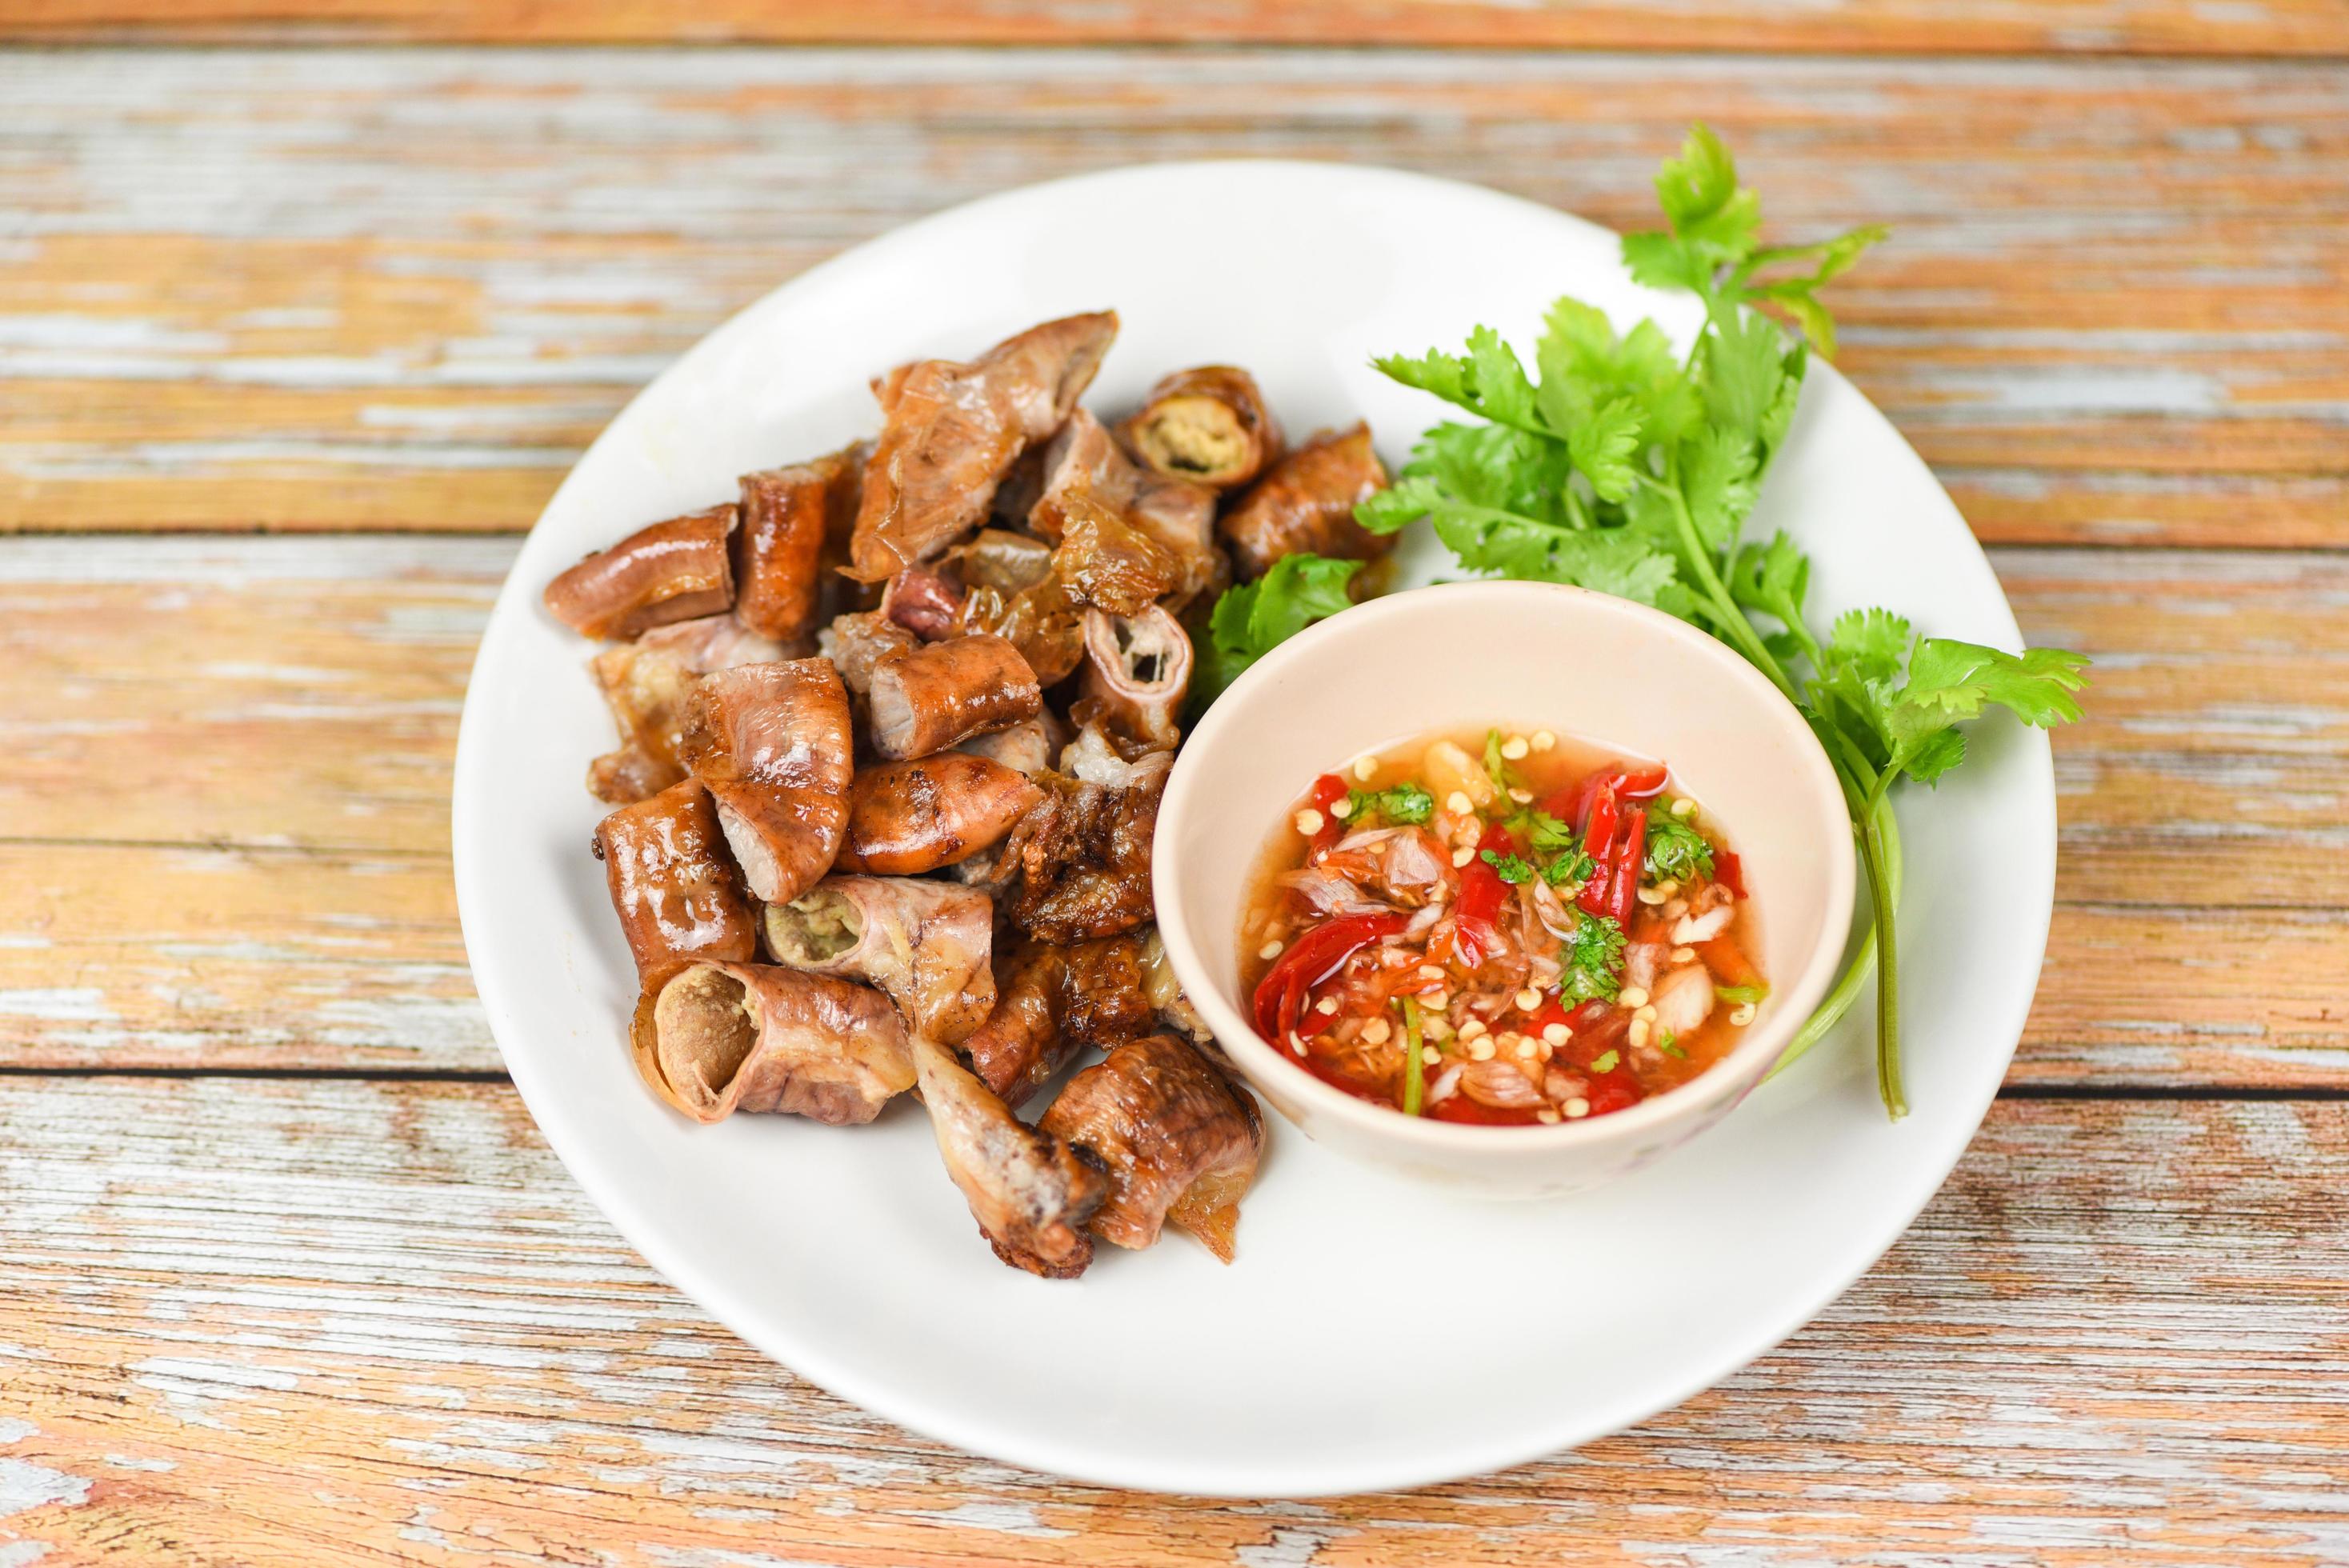 https://static.vecteezy.com/system/resources/previews/004/951/311/large_2x/entrails-intestines-part-of-pork-asian-thai-food-roasted-pork-chitterlings-with-chilli-sauce-spicy-free-photo.JPG